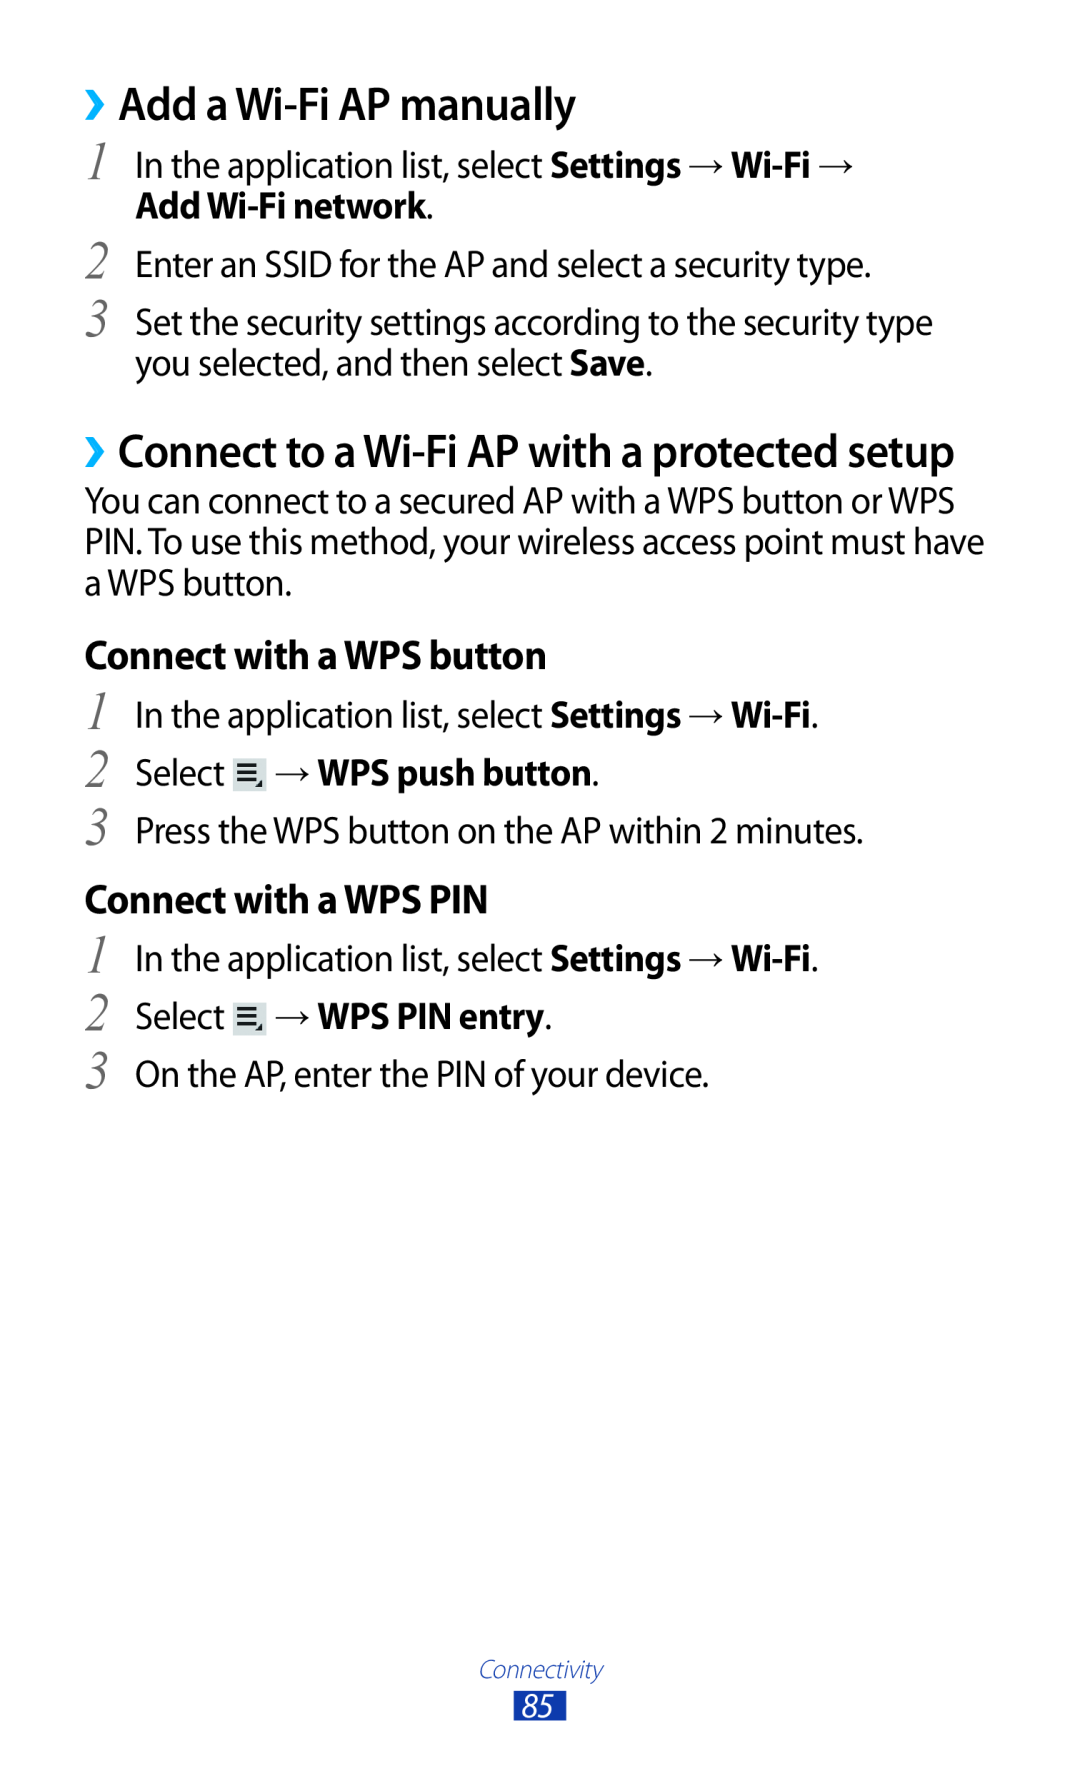 Samsung GTP5110ZWMTTT ››Add a Wi-Fi AP manually, ››Connect to a Wi-Fi AP with a protected setup, Connect with a WPS button 